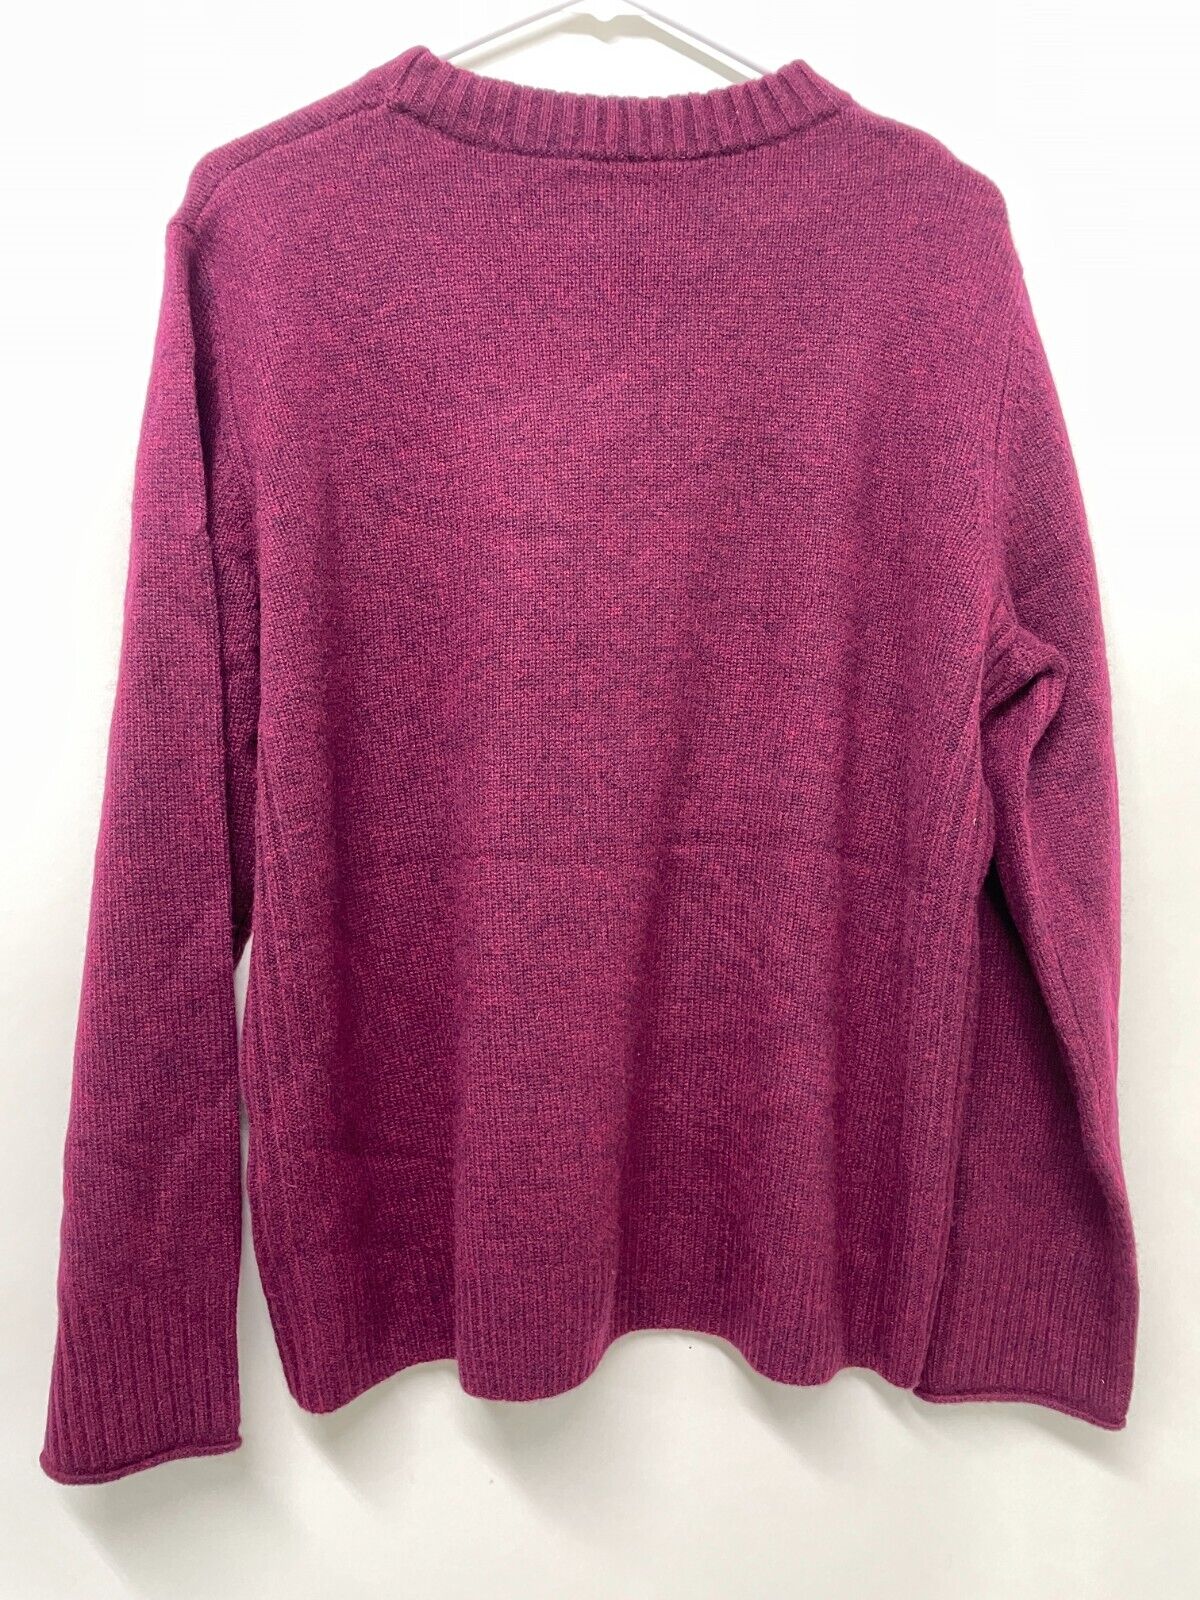 Brass Women's M The Boyfriend Cashmere Sweater Cabernet Purple Relaxed Fit NWT